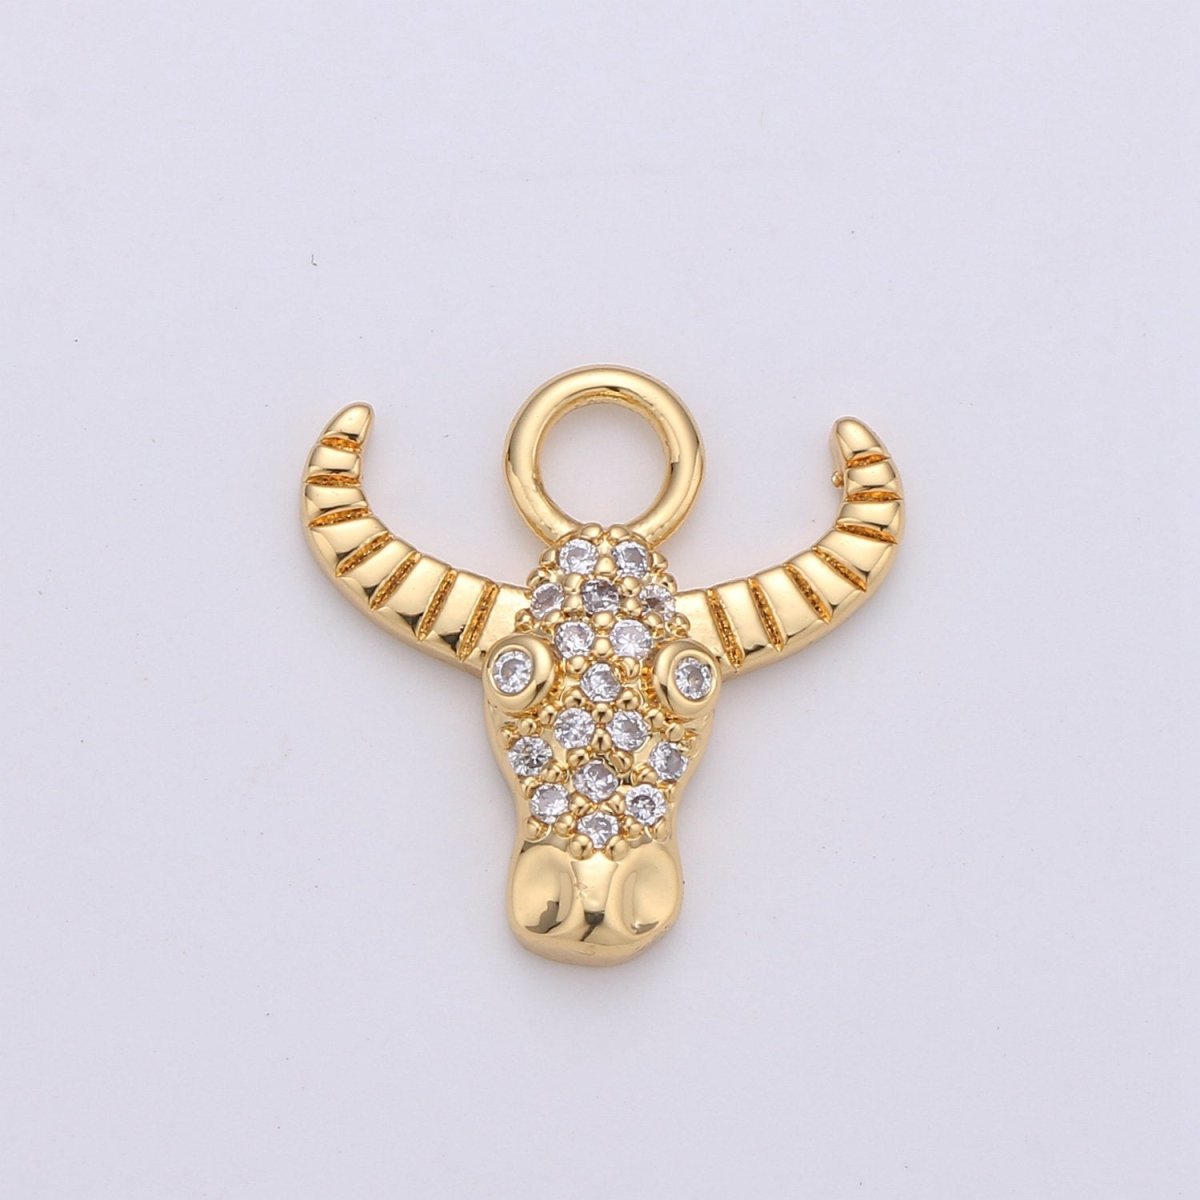 24K Gold Filled Dainty Bull Head Charm with Micro Pave Cubic Zirconia CZ Stone for Cow Animal Necklace or Bracelet Component C-935,C-936 - DLUXCA